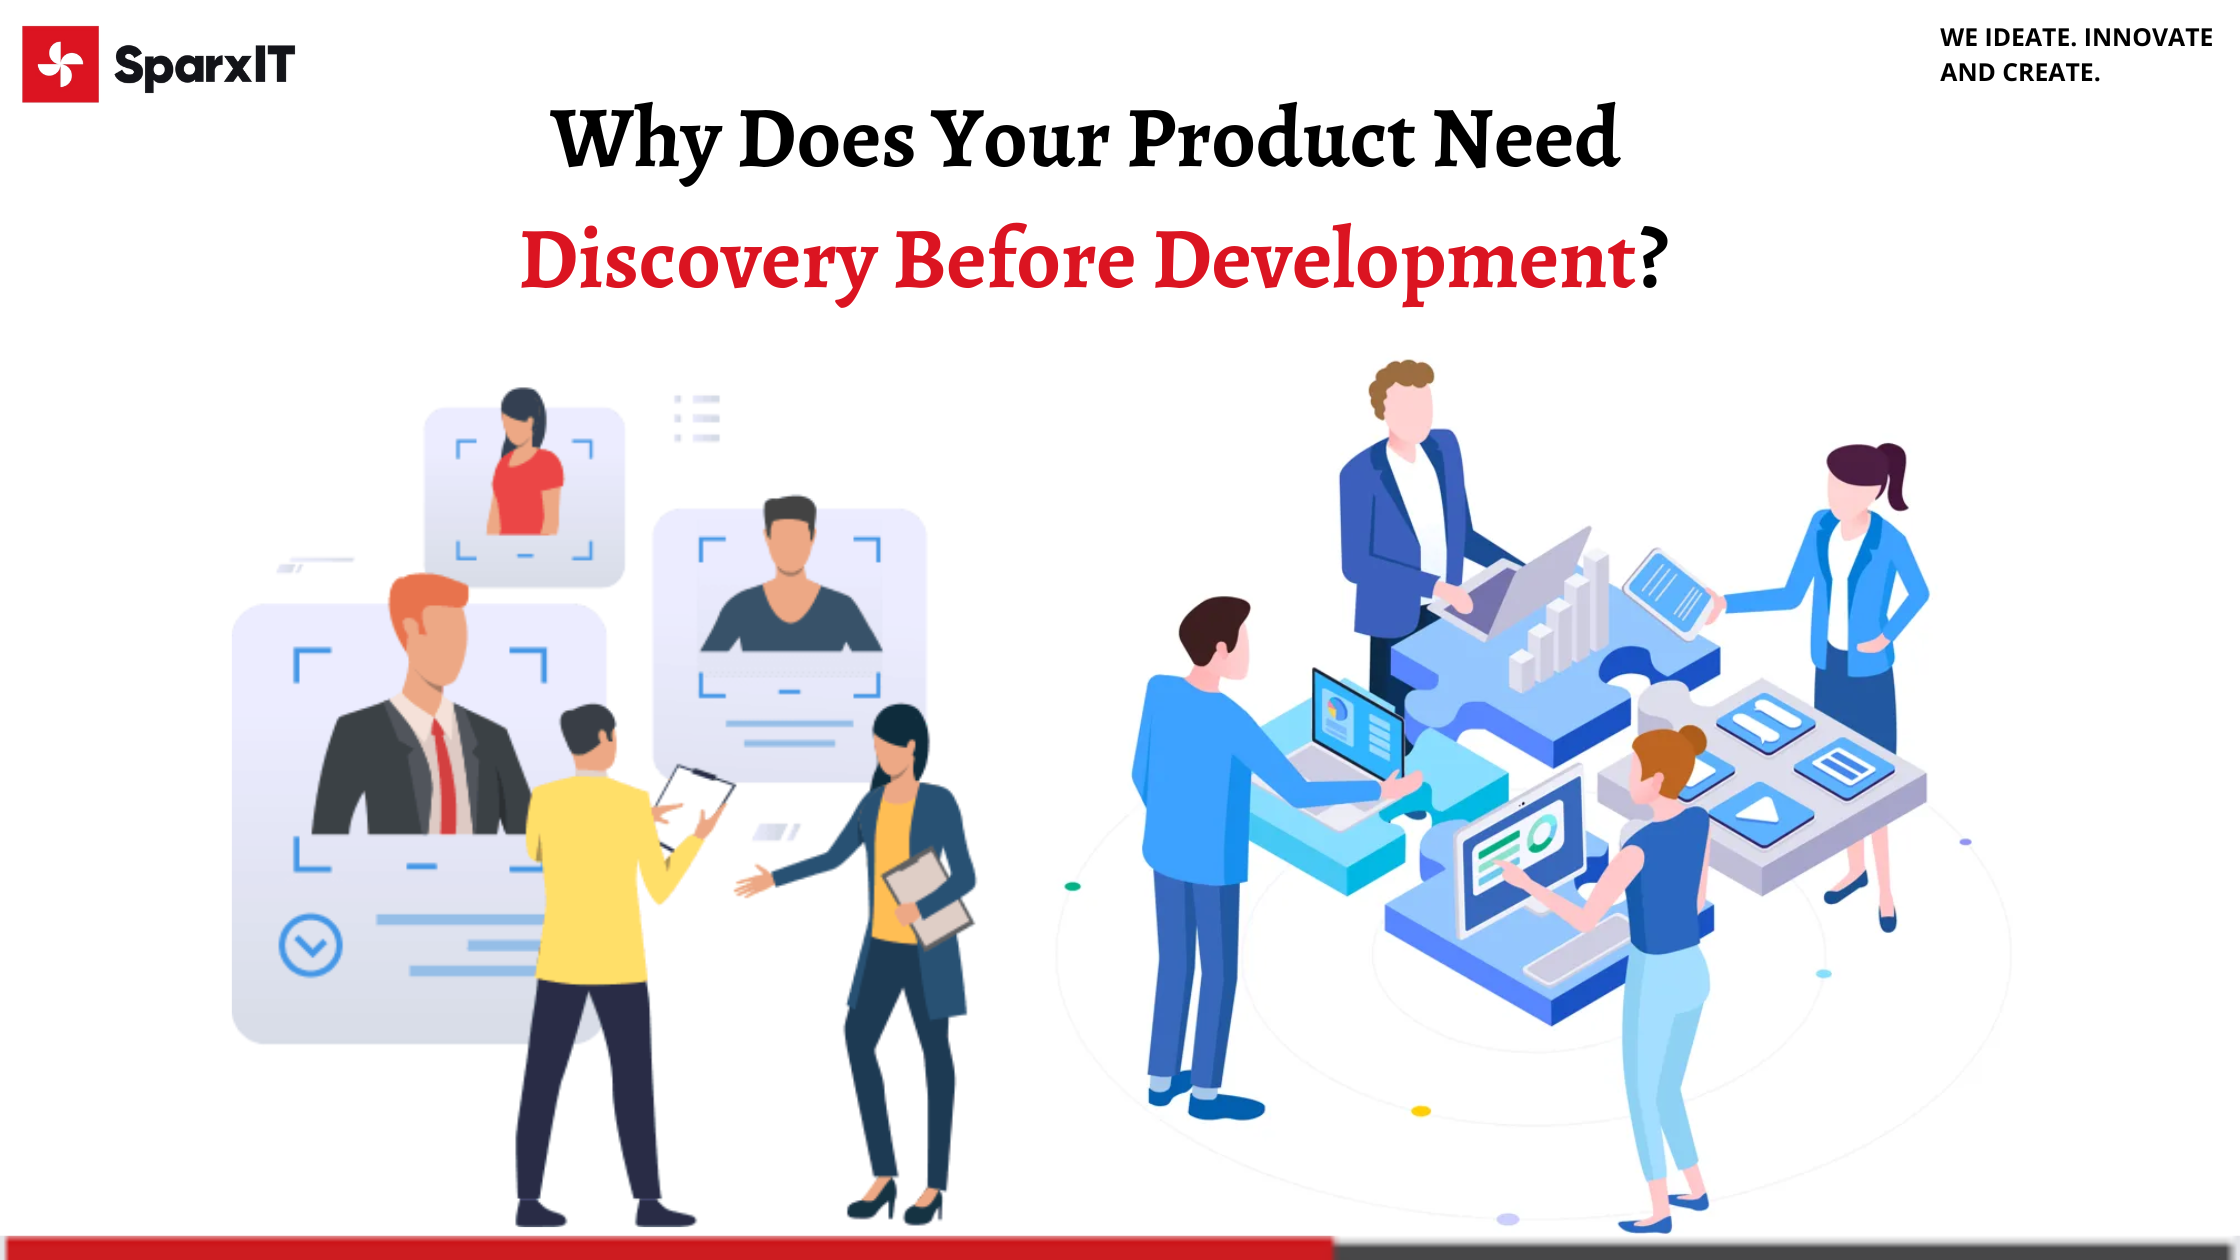 Why Does Your Product Need Discovery Before Development?